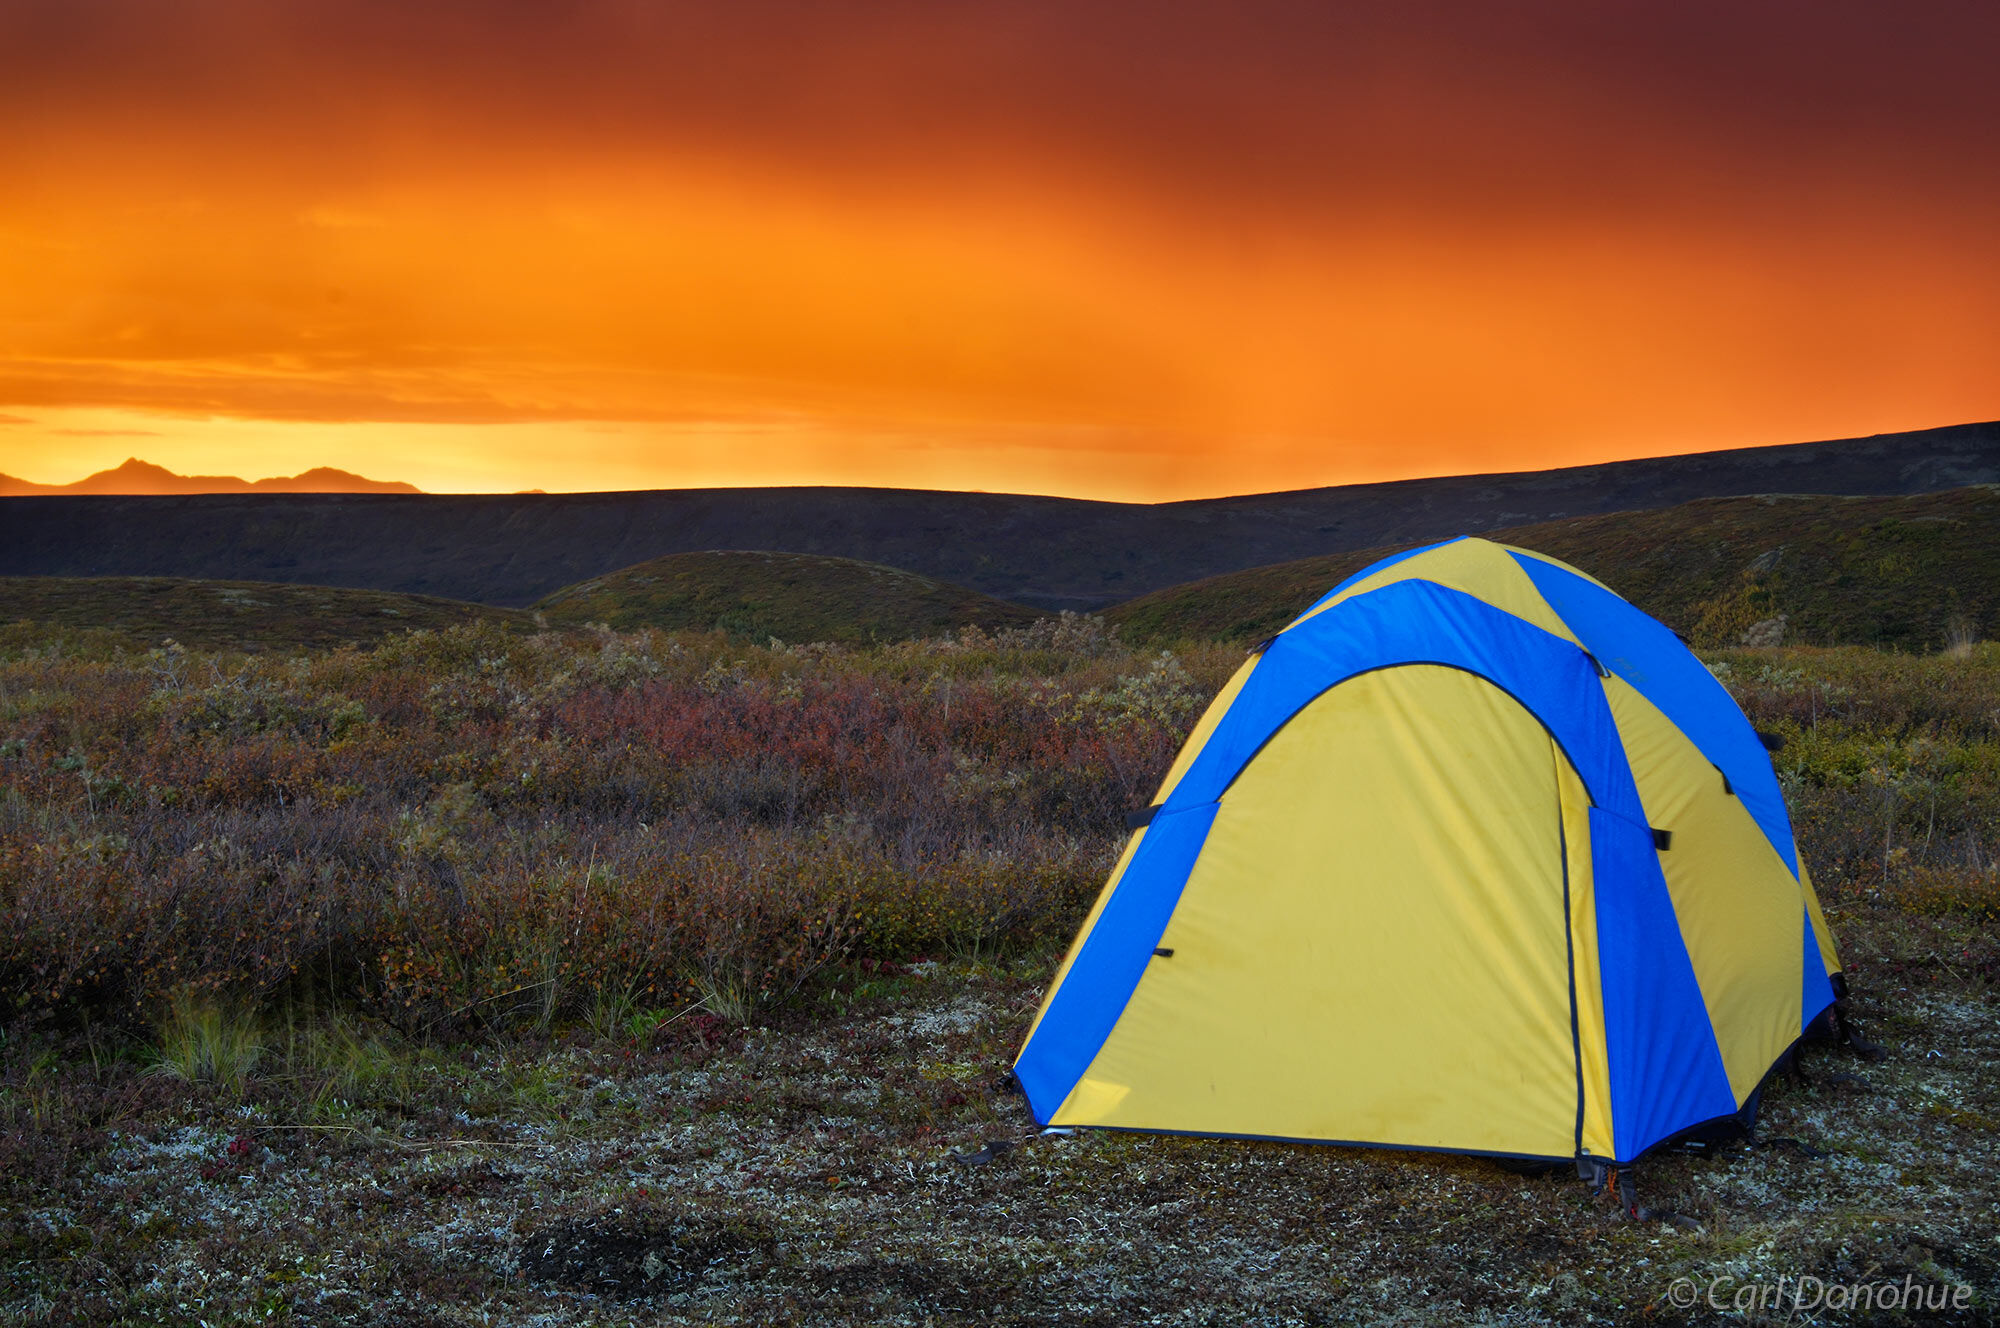 A backpacker's tentsite on the tundra is a nice spot to view the sunset, Denali National Park, Alaska.